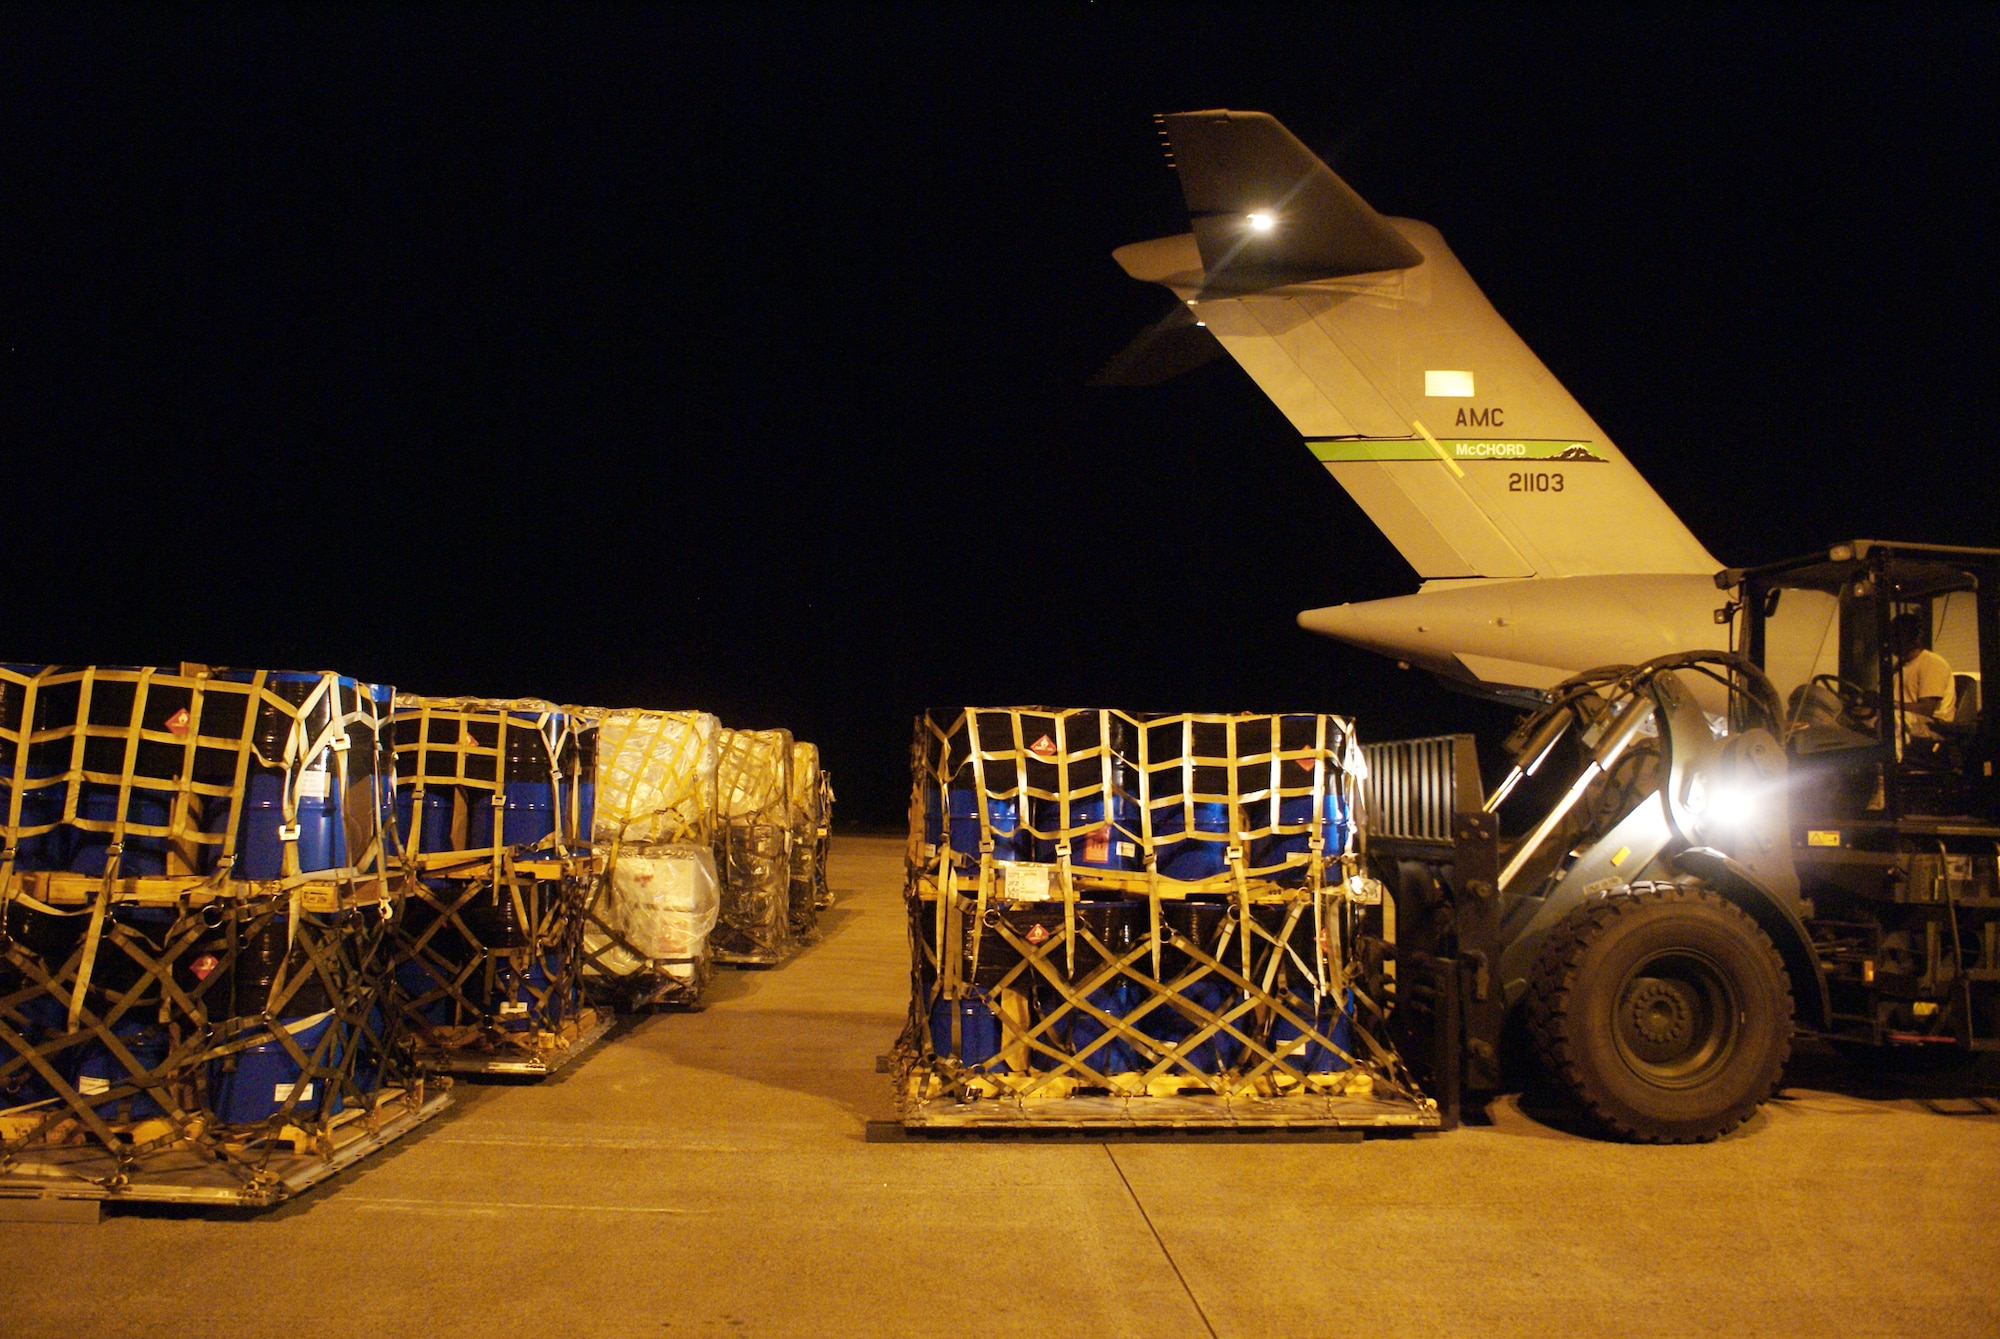 Airmen of the 36th Mobility Response Squadron from Andersen Air Force Base, Guam, use a forklift to off-load cargo from a C-17 Globemaster III on a humanitarian mission Oct. 9, 2009, at Minangkabau International Airport in Padang, Indonesia. (U.S. Air Force photo/Staff Sgt. Eric Burks) 